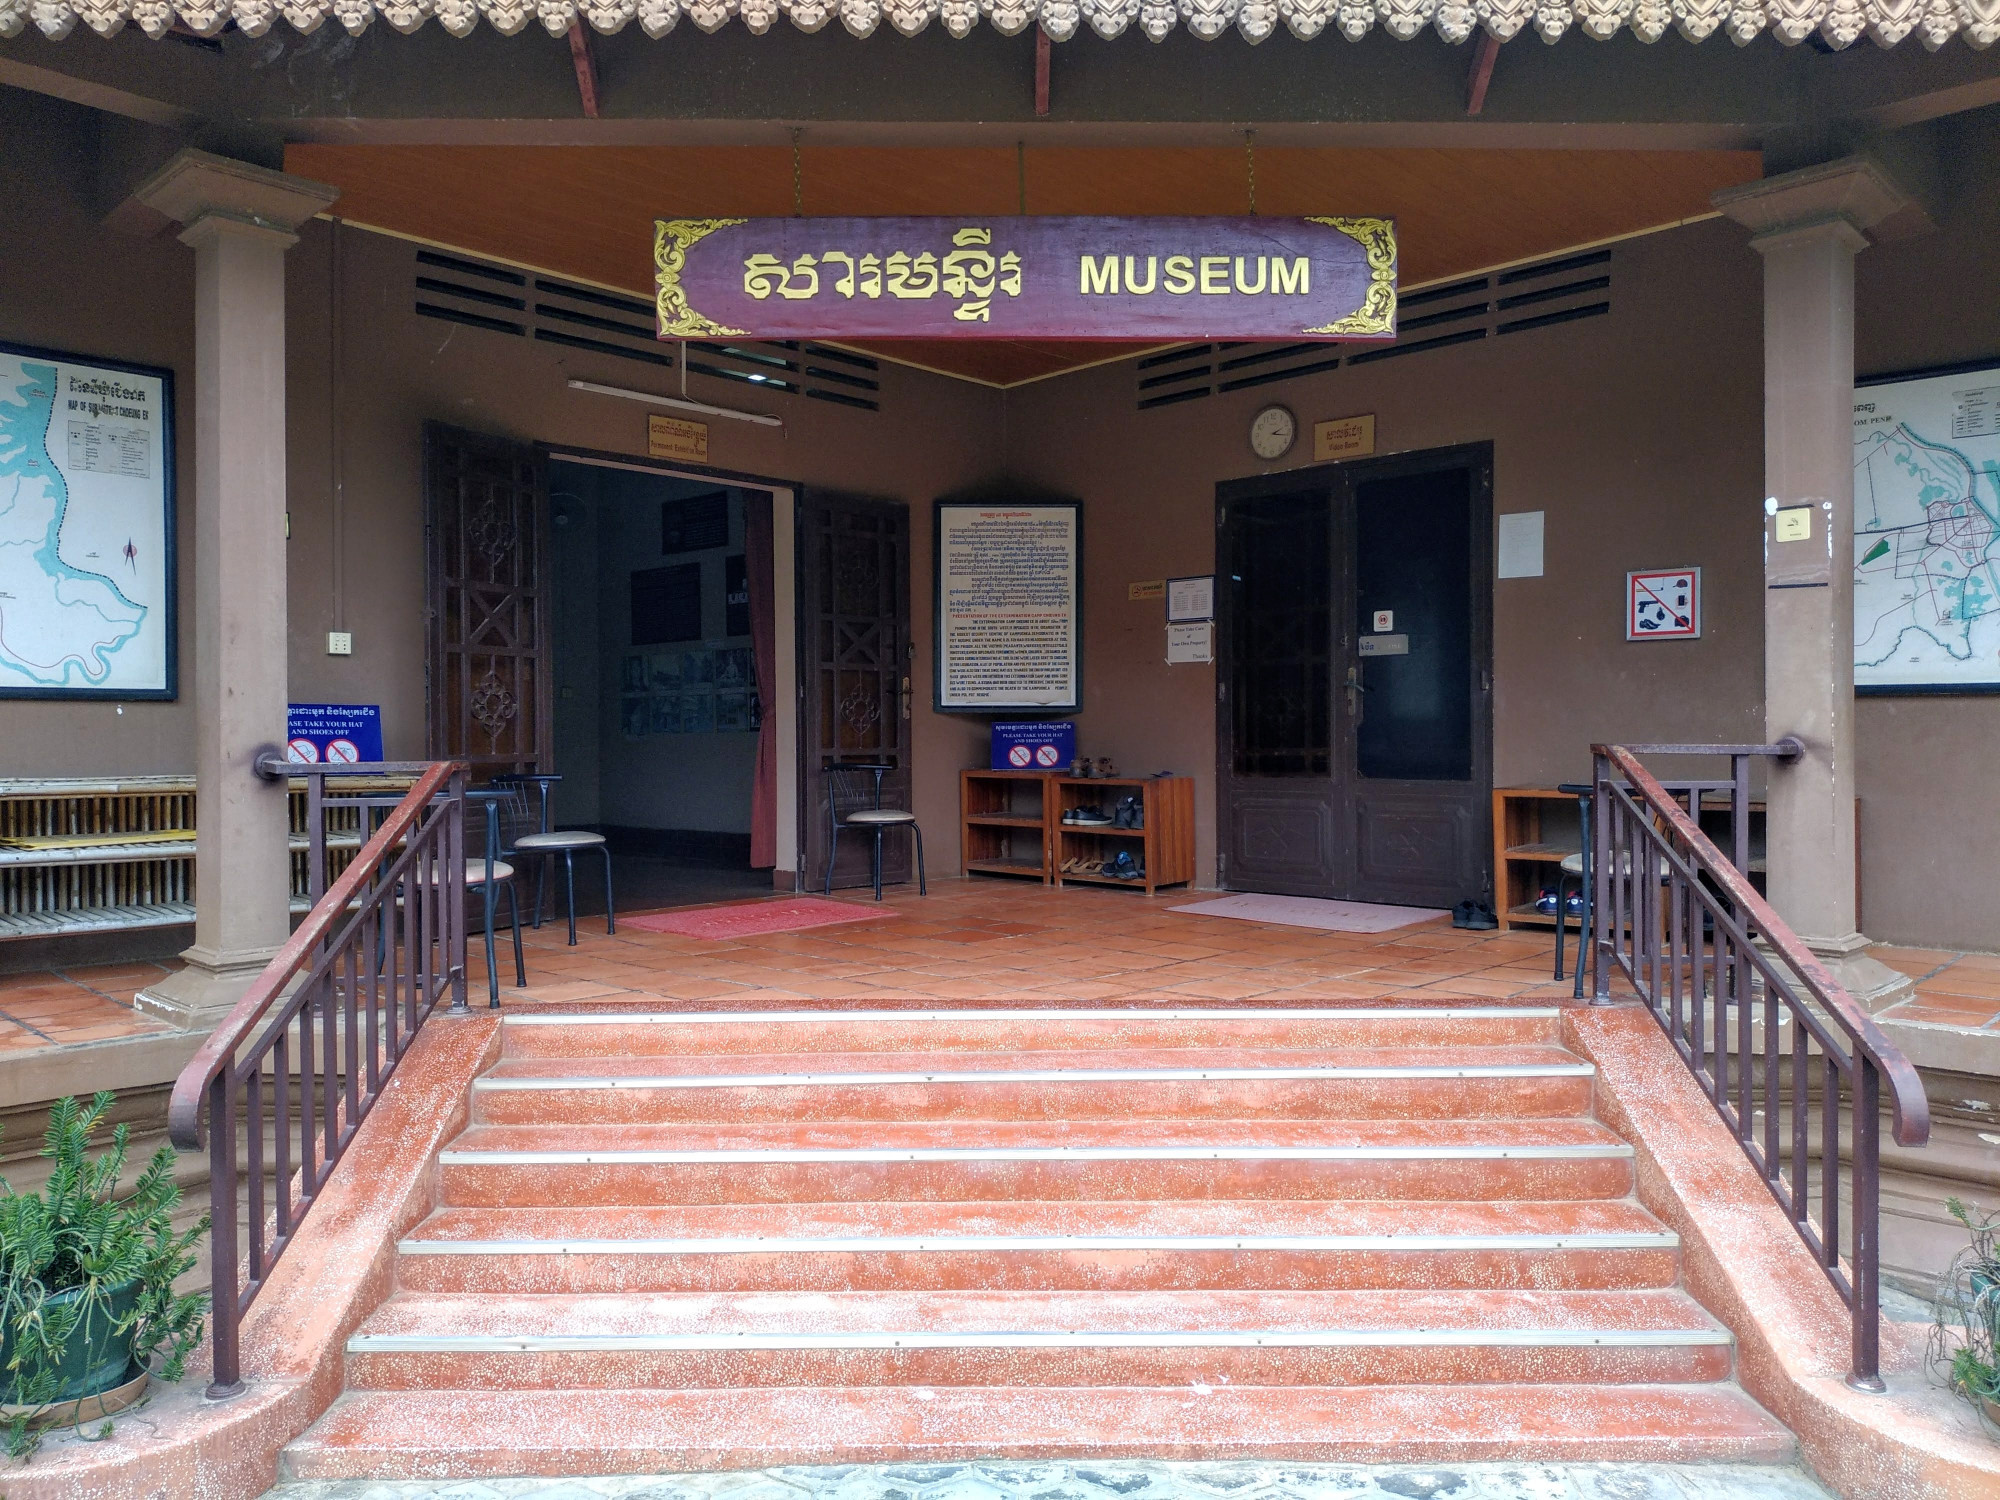 The Killing Fields Museum (Phnom Penh, Cambodia) was a site of genocide during the Pol Pot regime.<br/> <br/>
This is a place of sorrow.<br/>
But, it is important for people to visit such places. To remember what dictatorial regimes lead to.